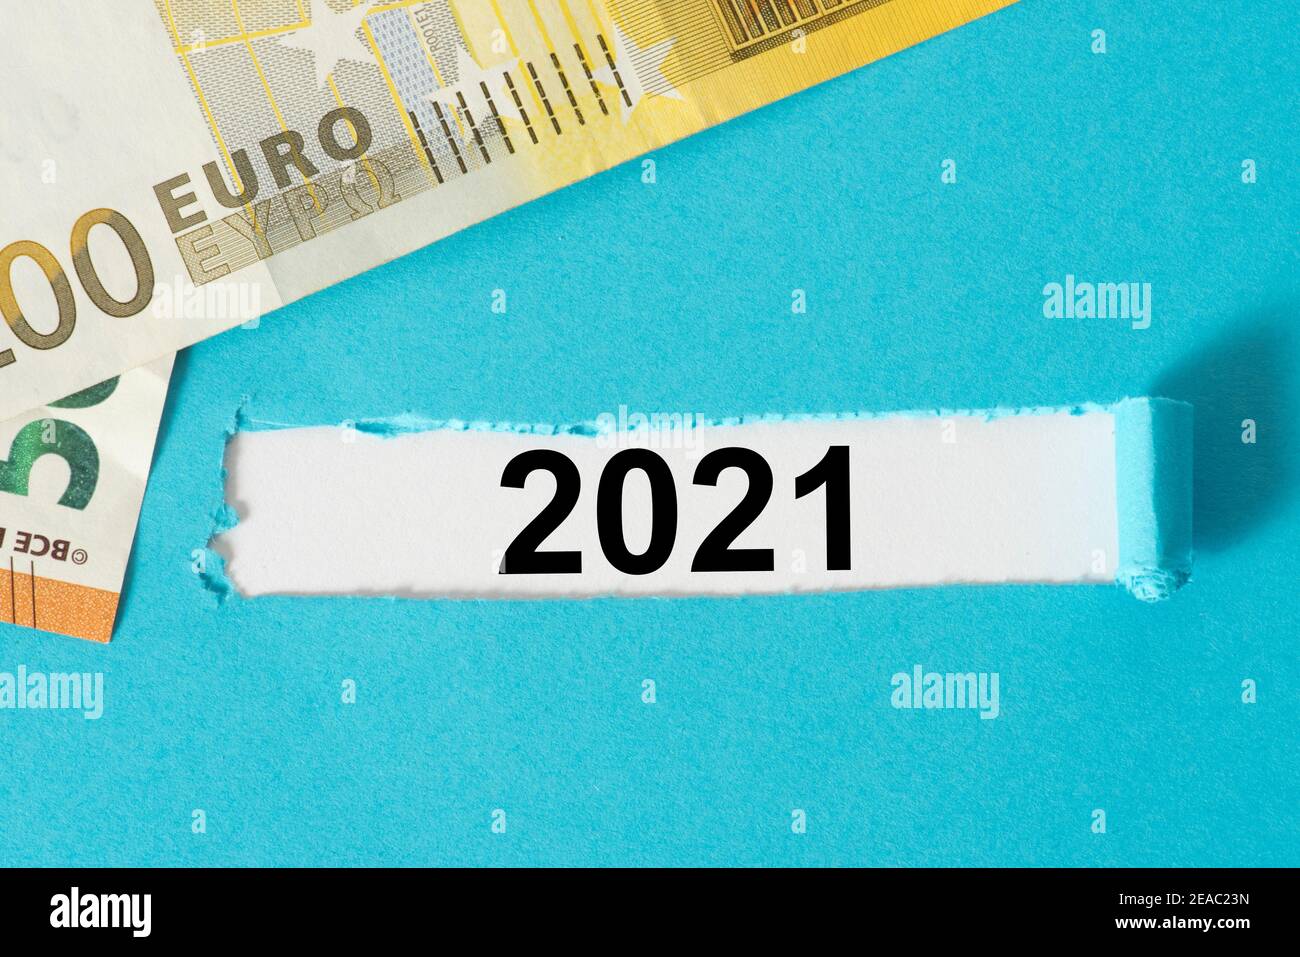 Euro banknotes and the year 2021 Stock Photo